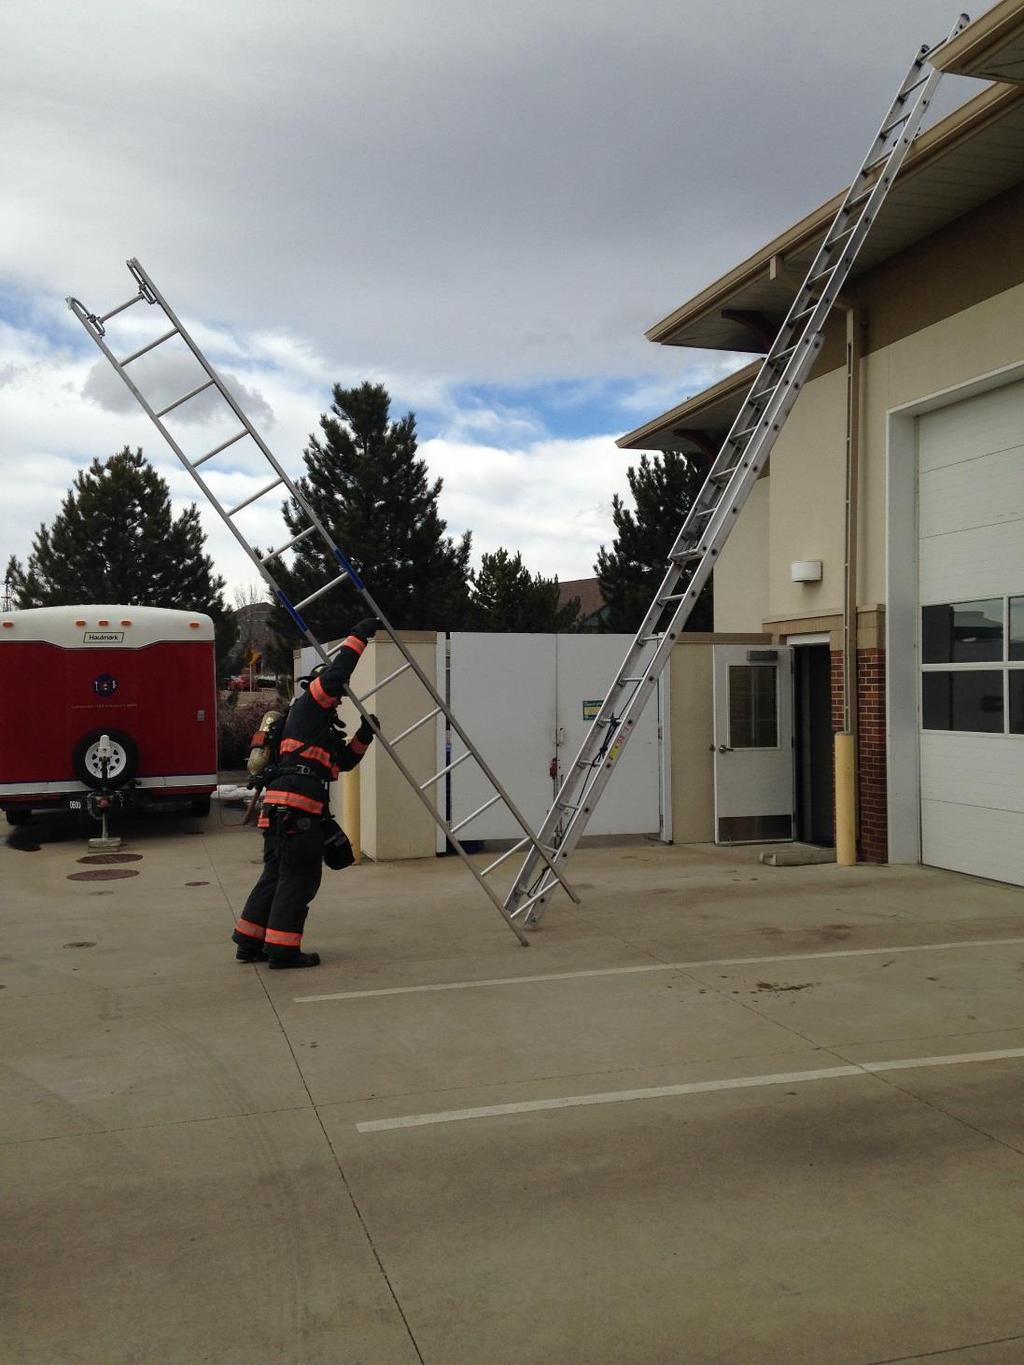 #12.1 An alternative to the pivot raise above would be to raise the roof ladder right next to the extension ladder using a beam raise.